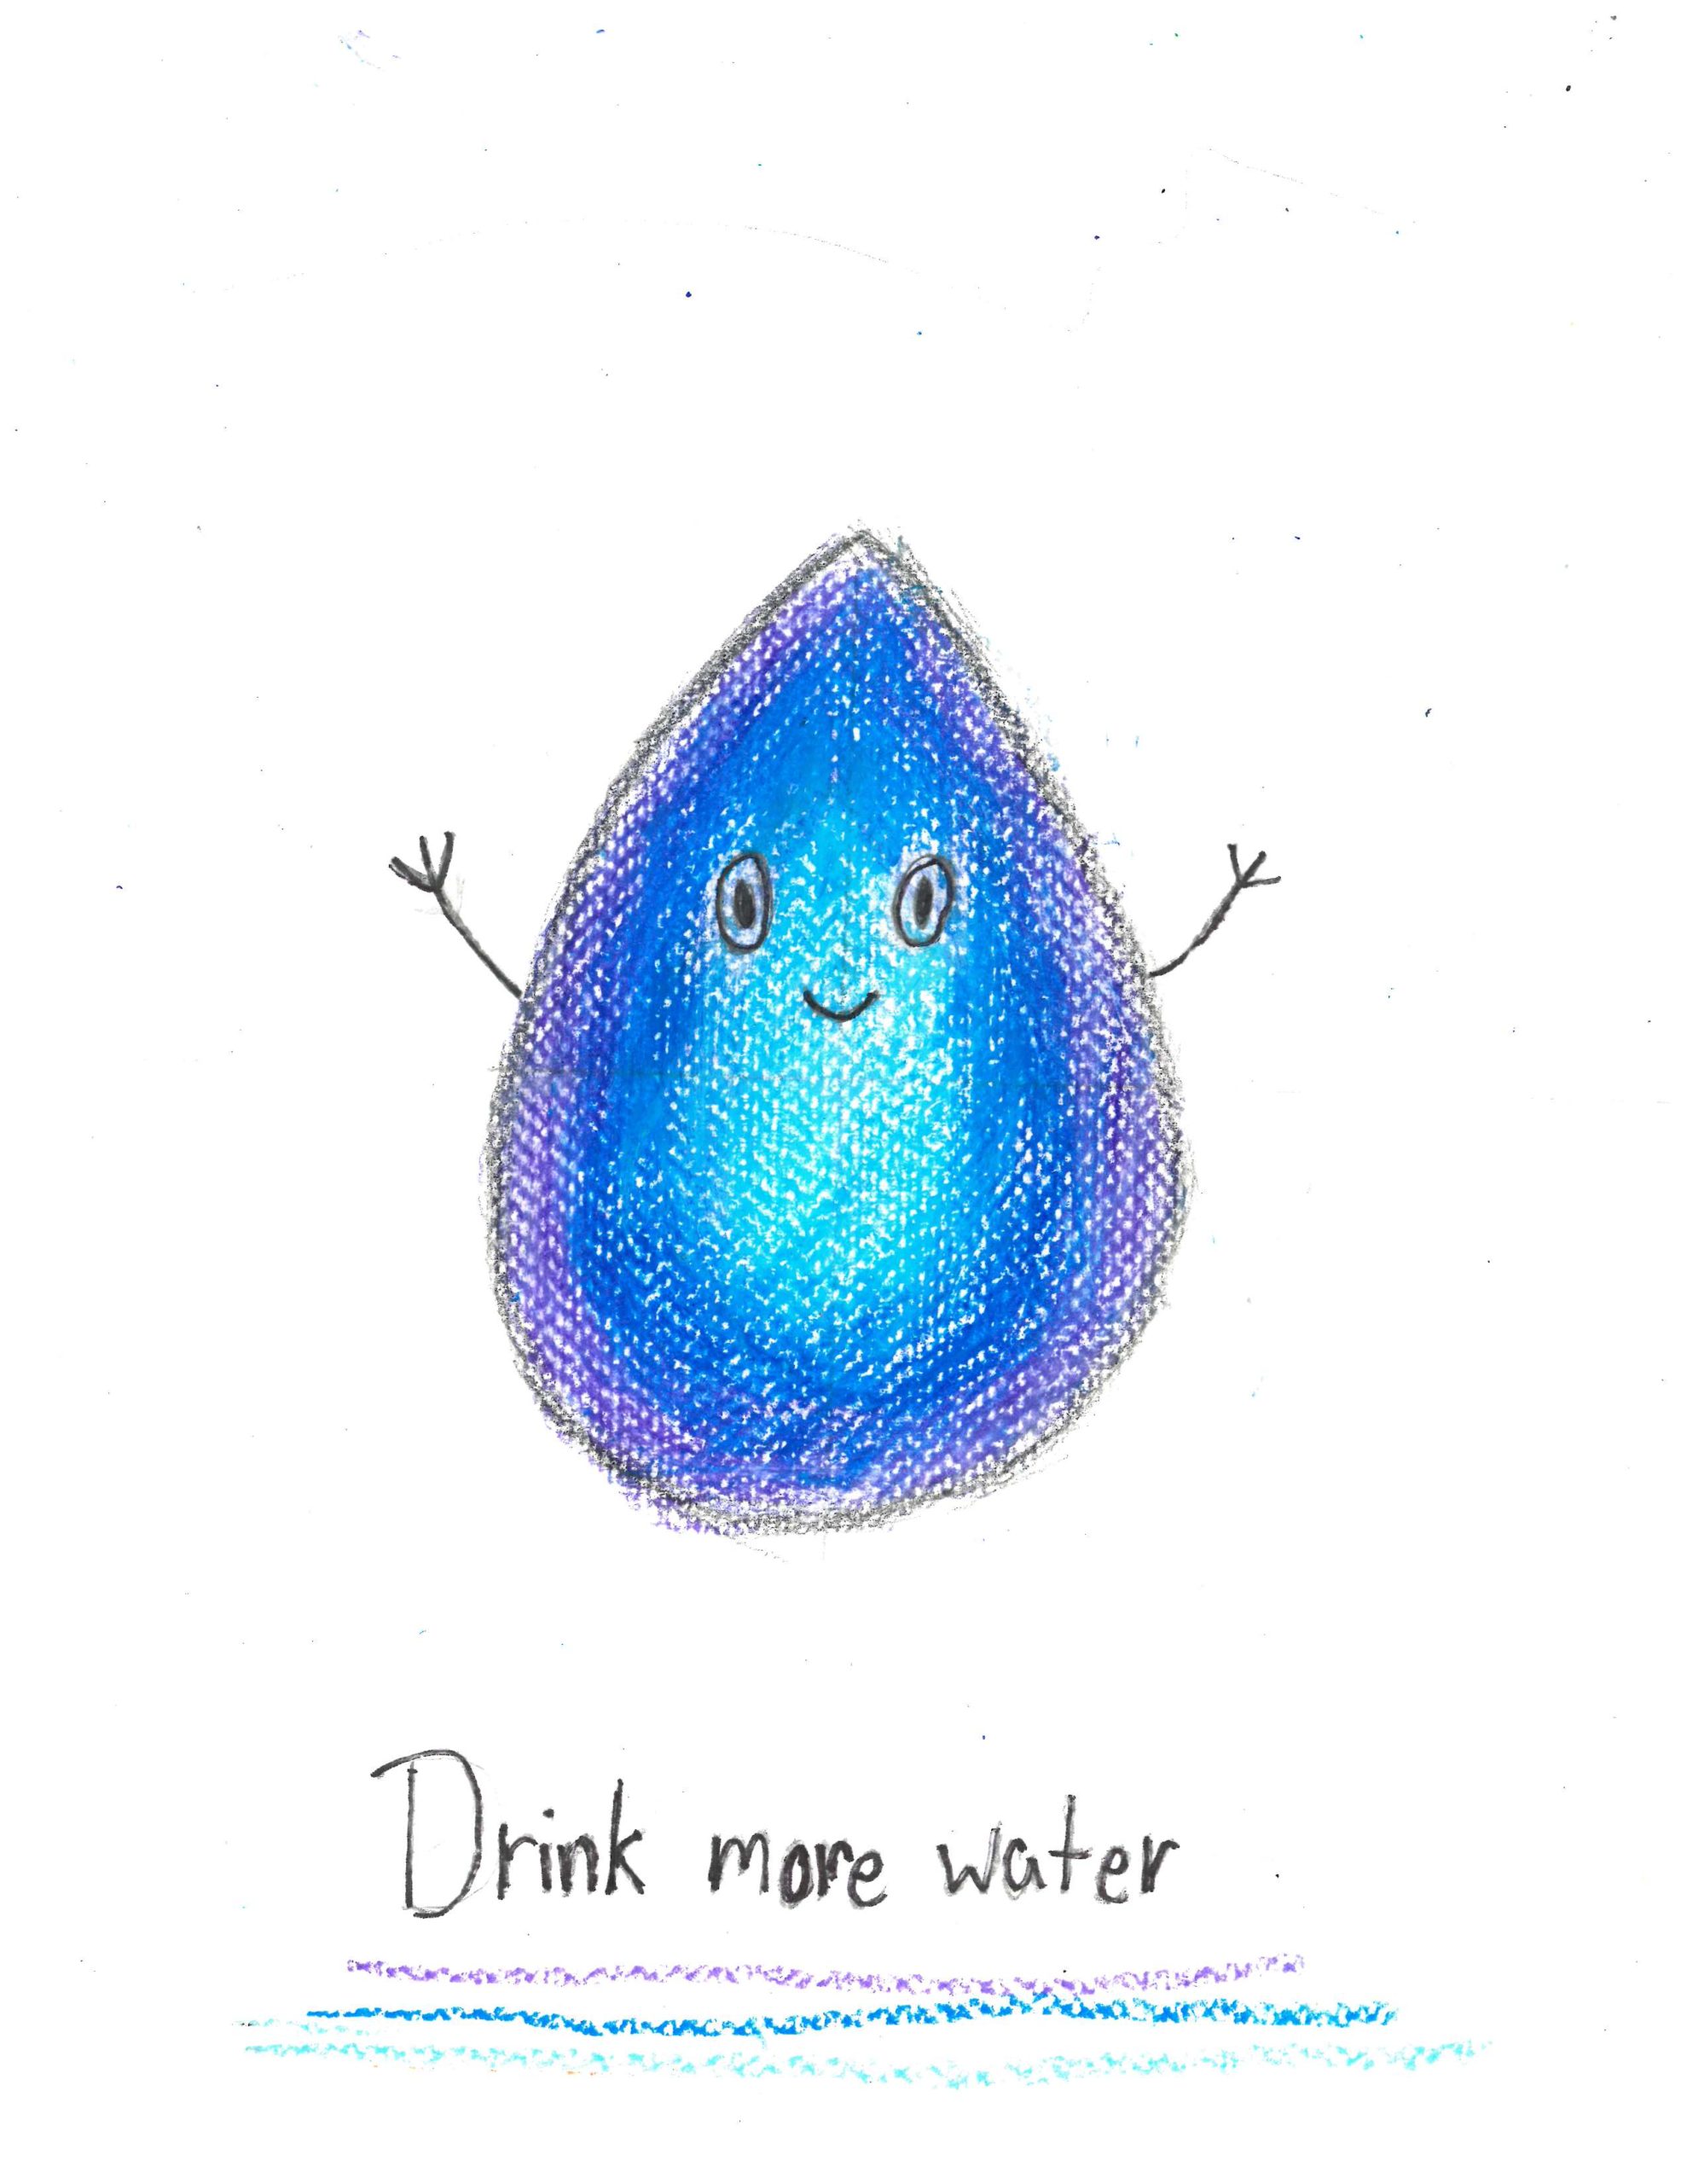 A drawing of a water drop with eyes and a smile. Underneath is written "Drink more water"